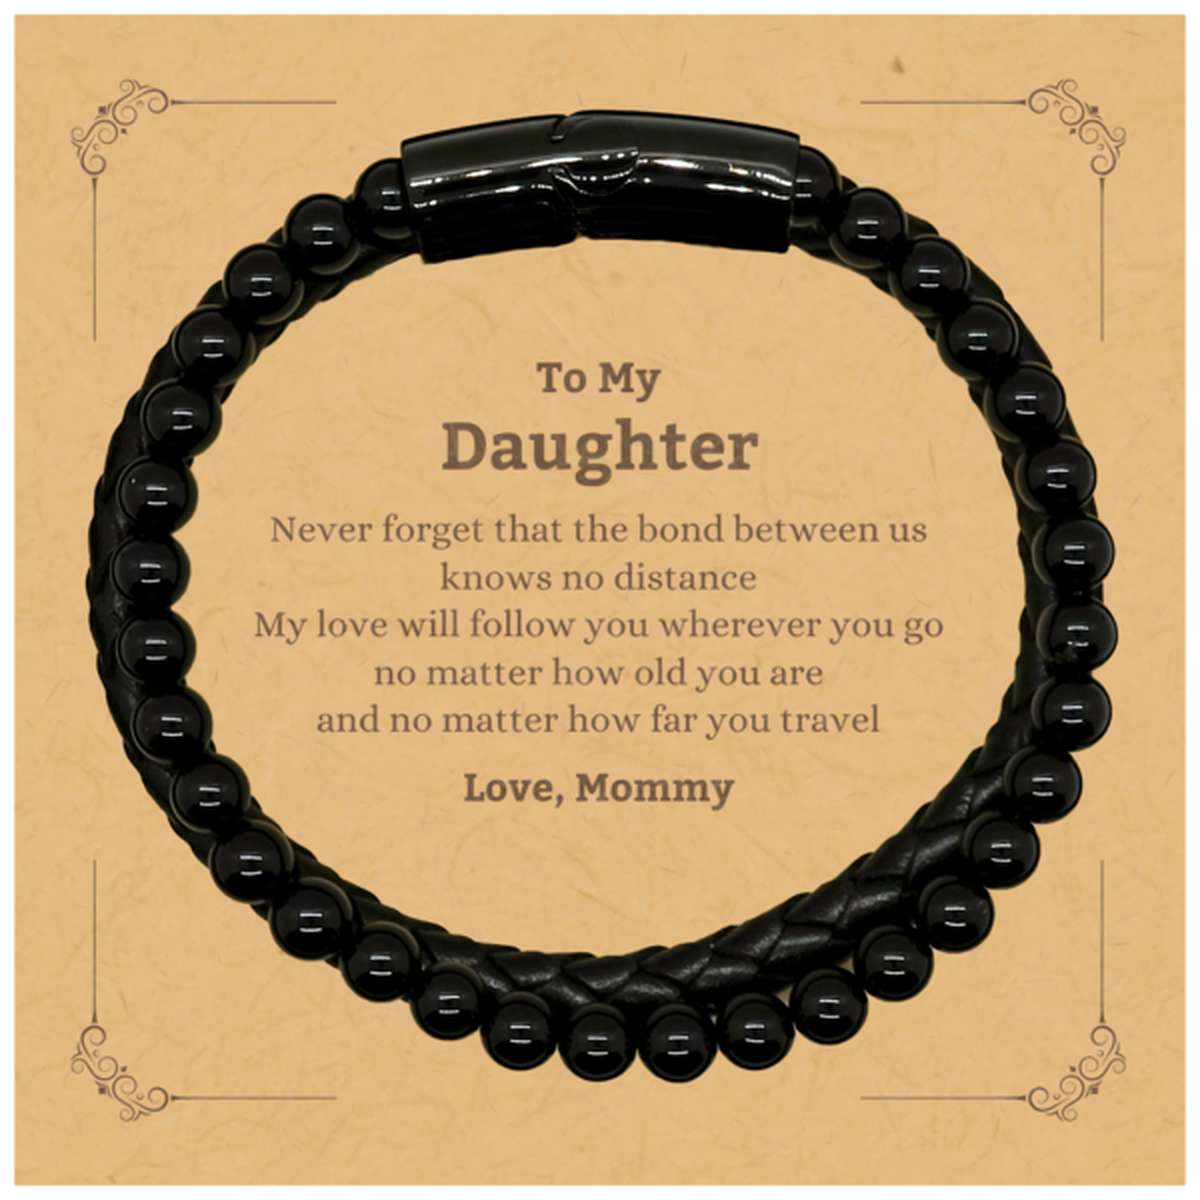 Daughter Birthday Gifts from Mommy, Adjustable Stone Leather Bracelets for Daughter Christmas Graduation Unique Gifts Daughter Never forget that the bond between us knows no distance. Love, Mommy